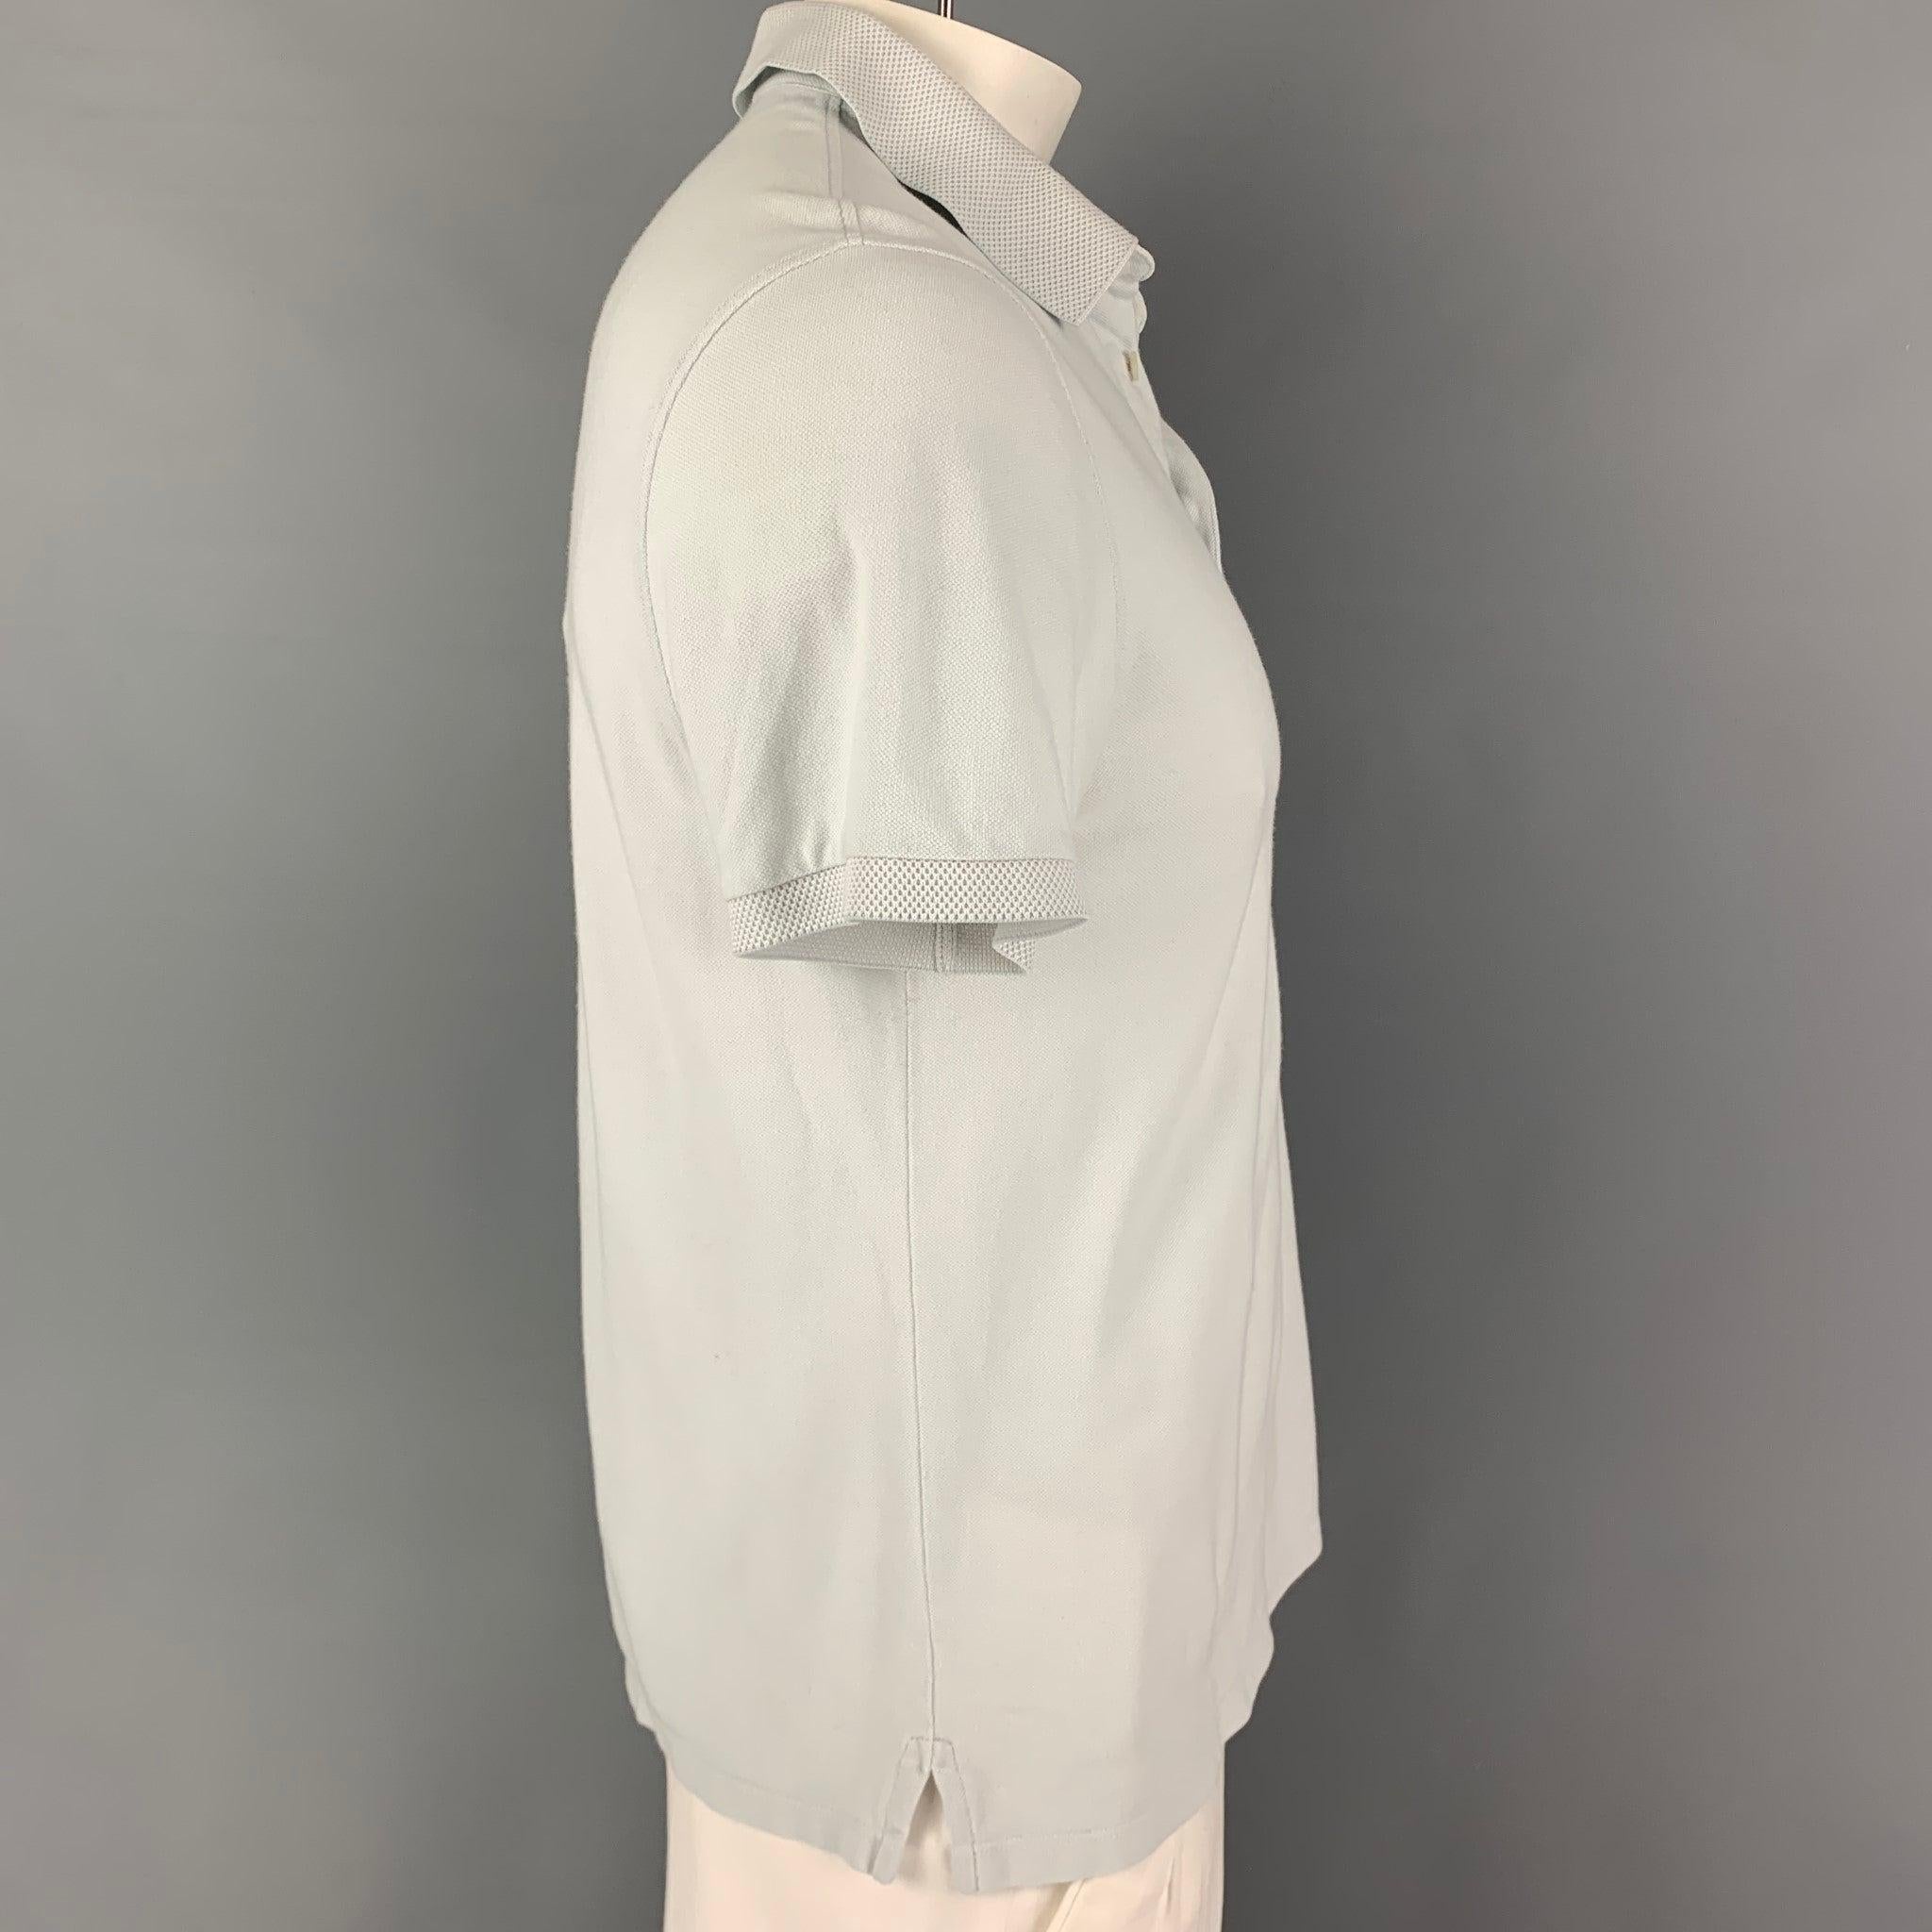 ERMENEGILDO ZEGNA polo comes in a light blue cotton featuring short sleeves, spread collar, and a half button up closure.
Good
Pre-Owned Condition. Light wear & minor hole ar back. As-is.  

Marked:   M/50 

Measurements: 
 
Shoulder: 18.5 inches